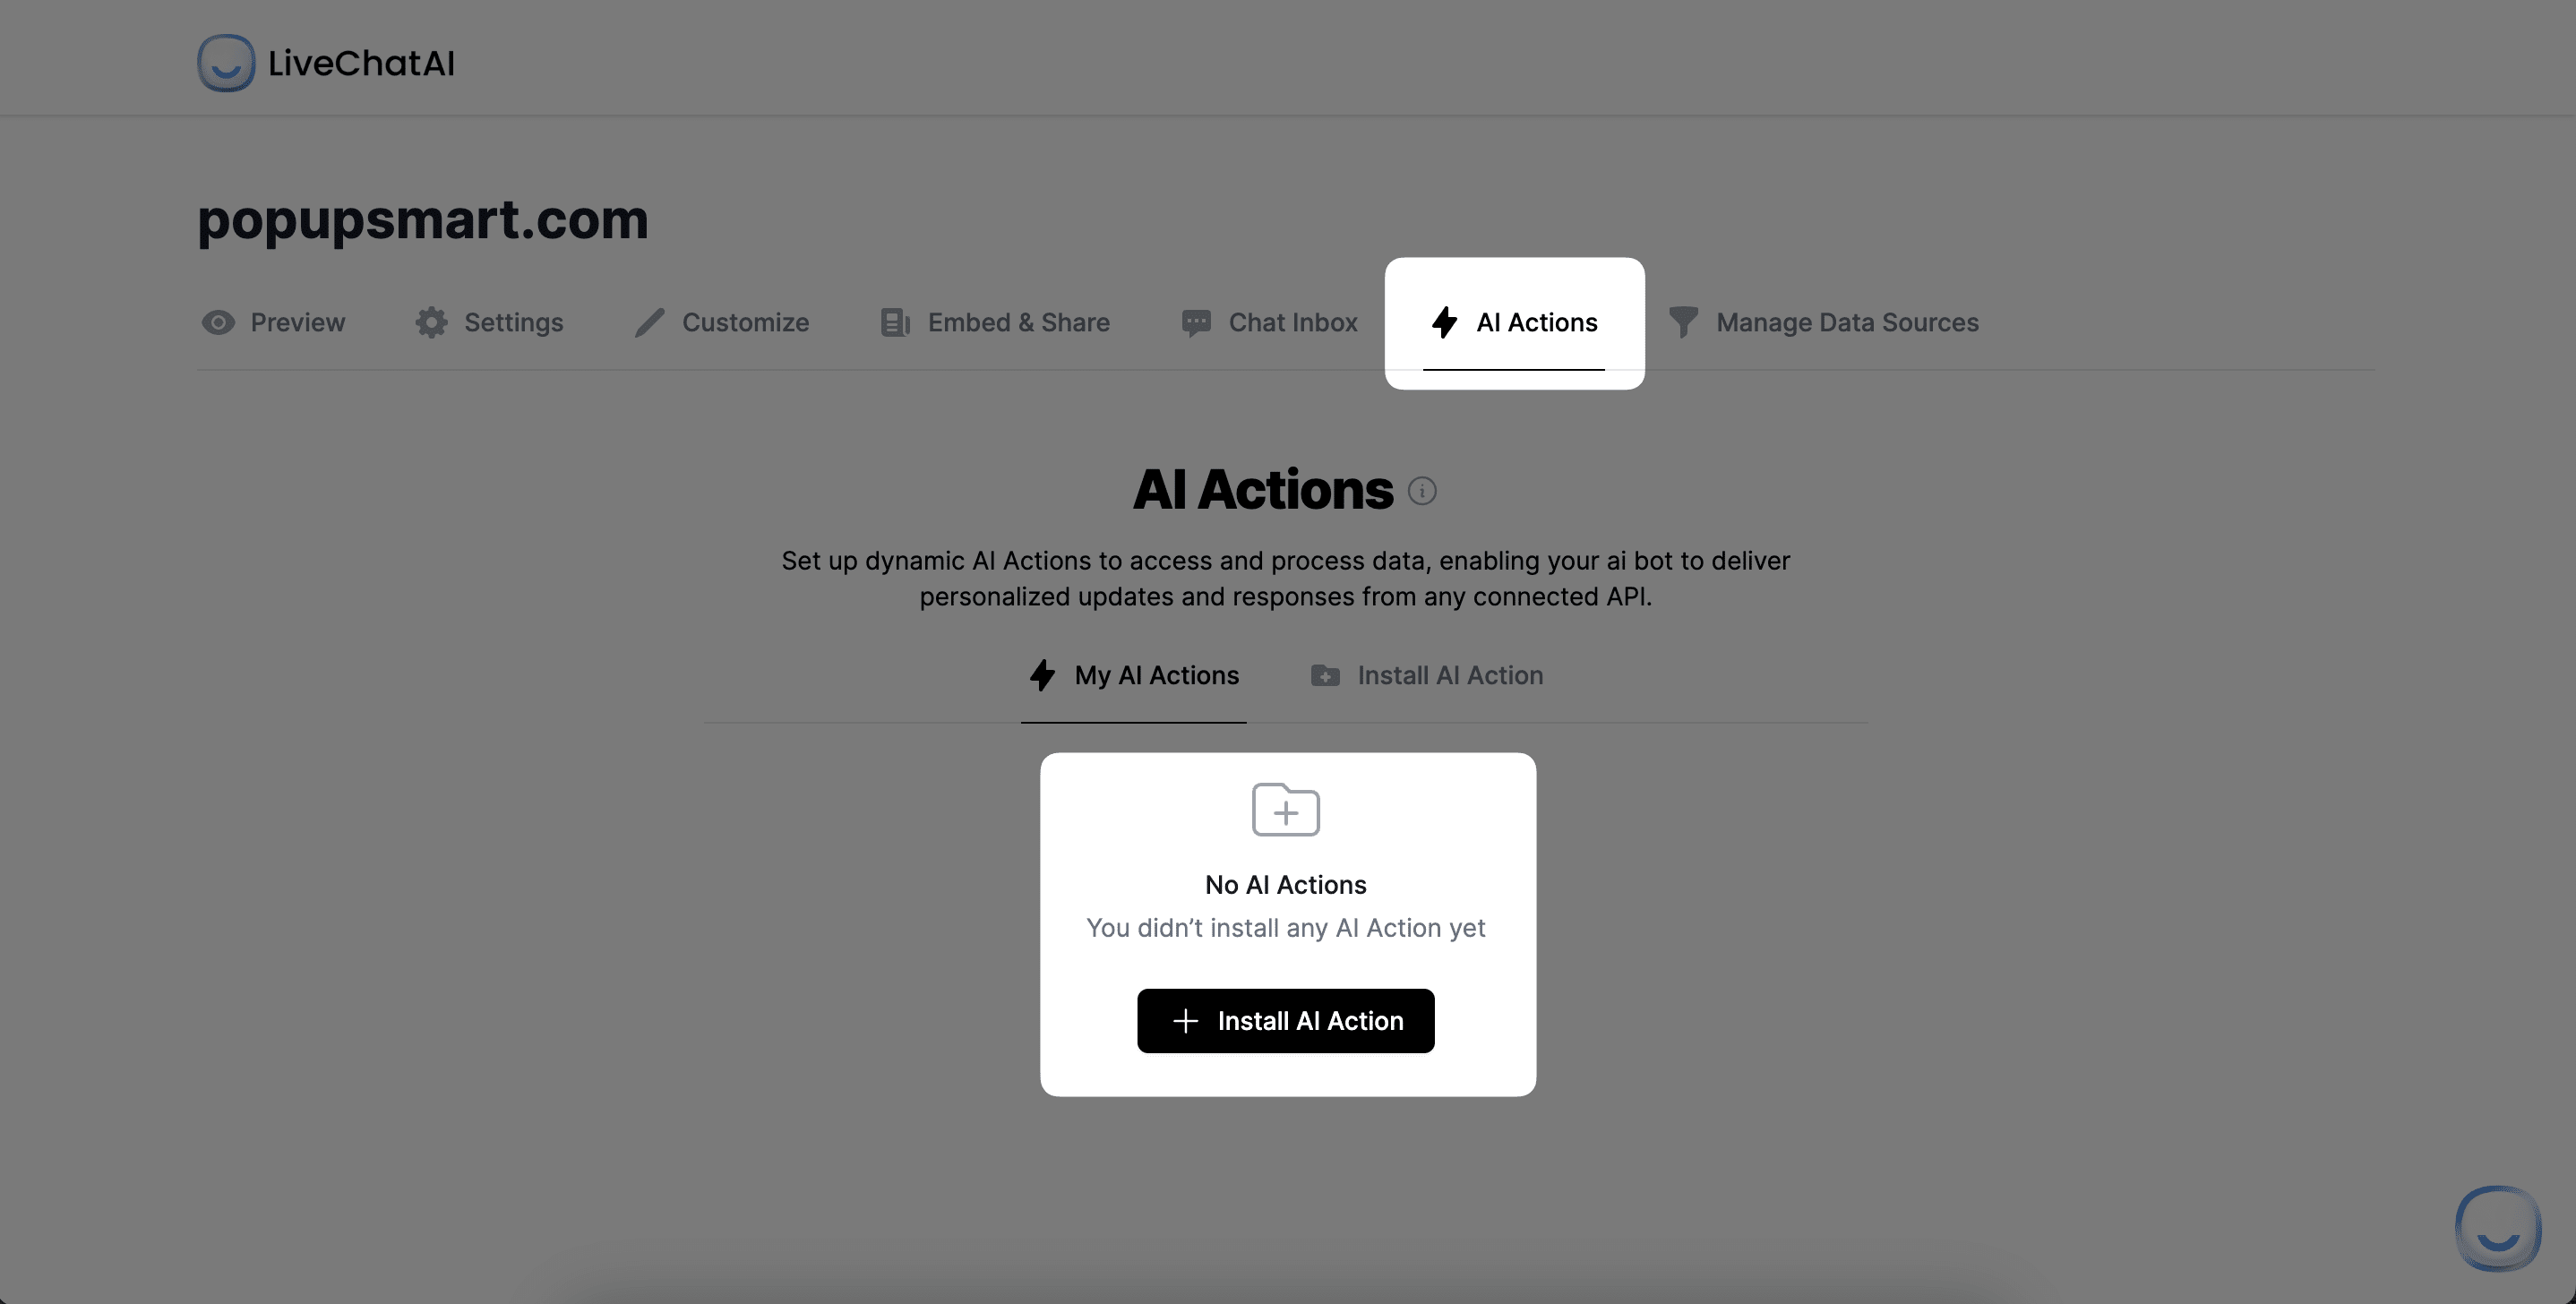 Showing Install AI Action button in AI Actions section in LiveChatAI